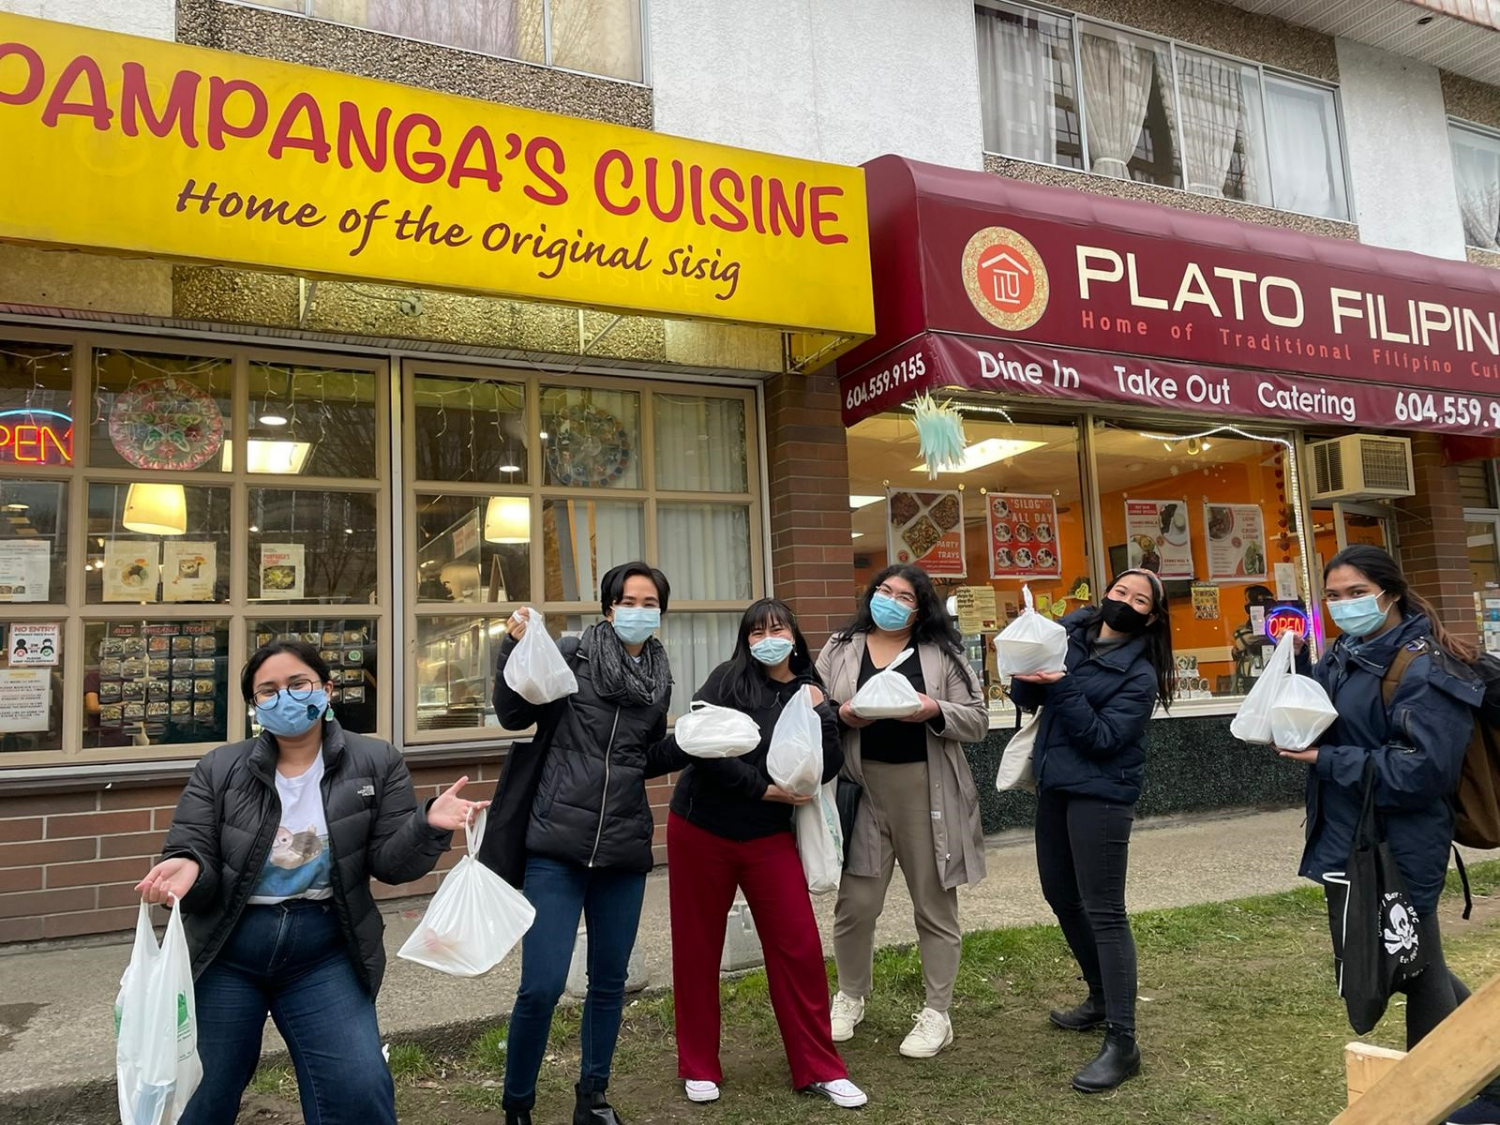 A group of smiling masked people holding bagged takeout containers standing in front of two Philippino restaurants 